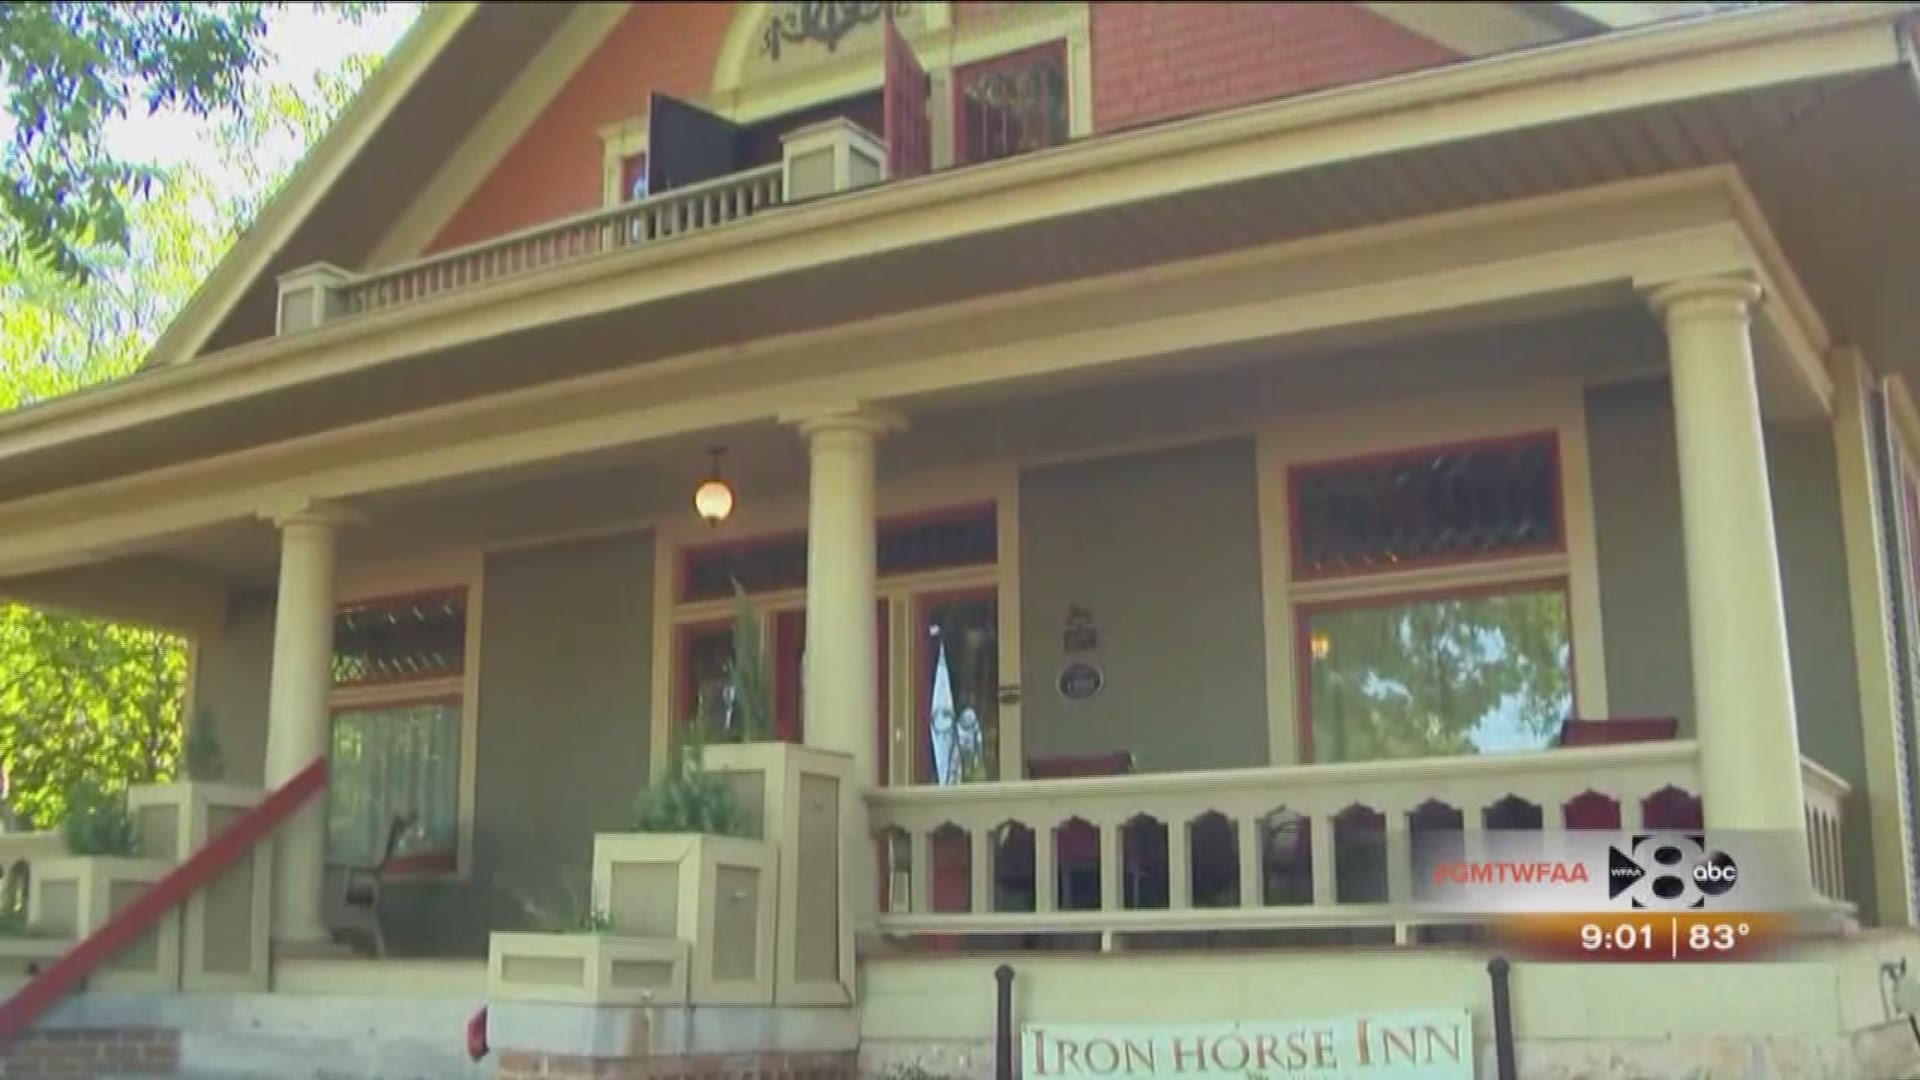 The Iron Horse Inn Bed and Breakfast is located in Granbury. To make reservations or for more information go to ironhorsebb.com